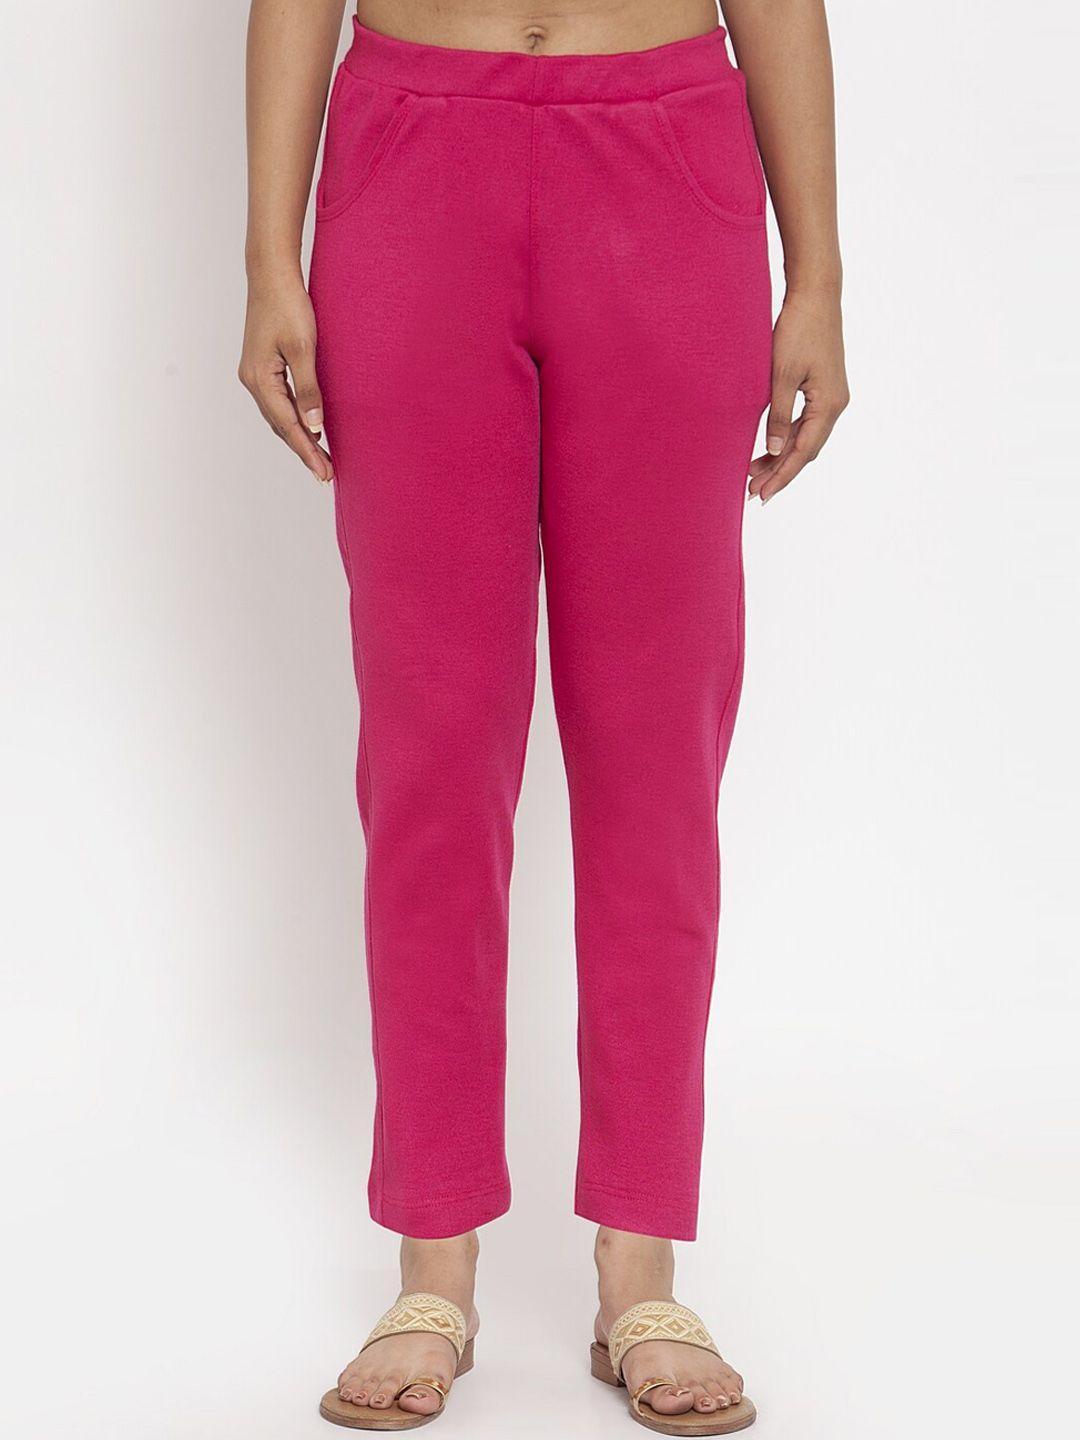 tag 7 women pink ethnic cigarette trousers